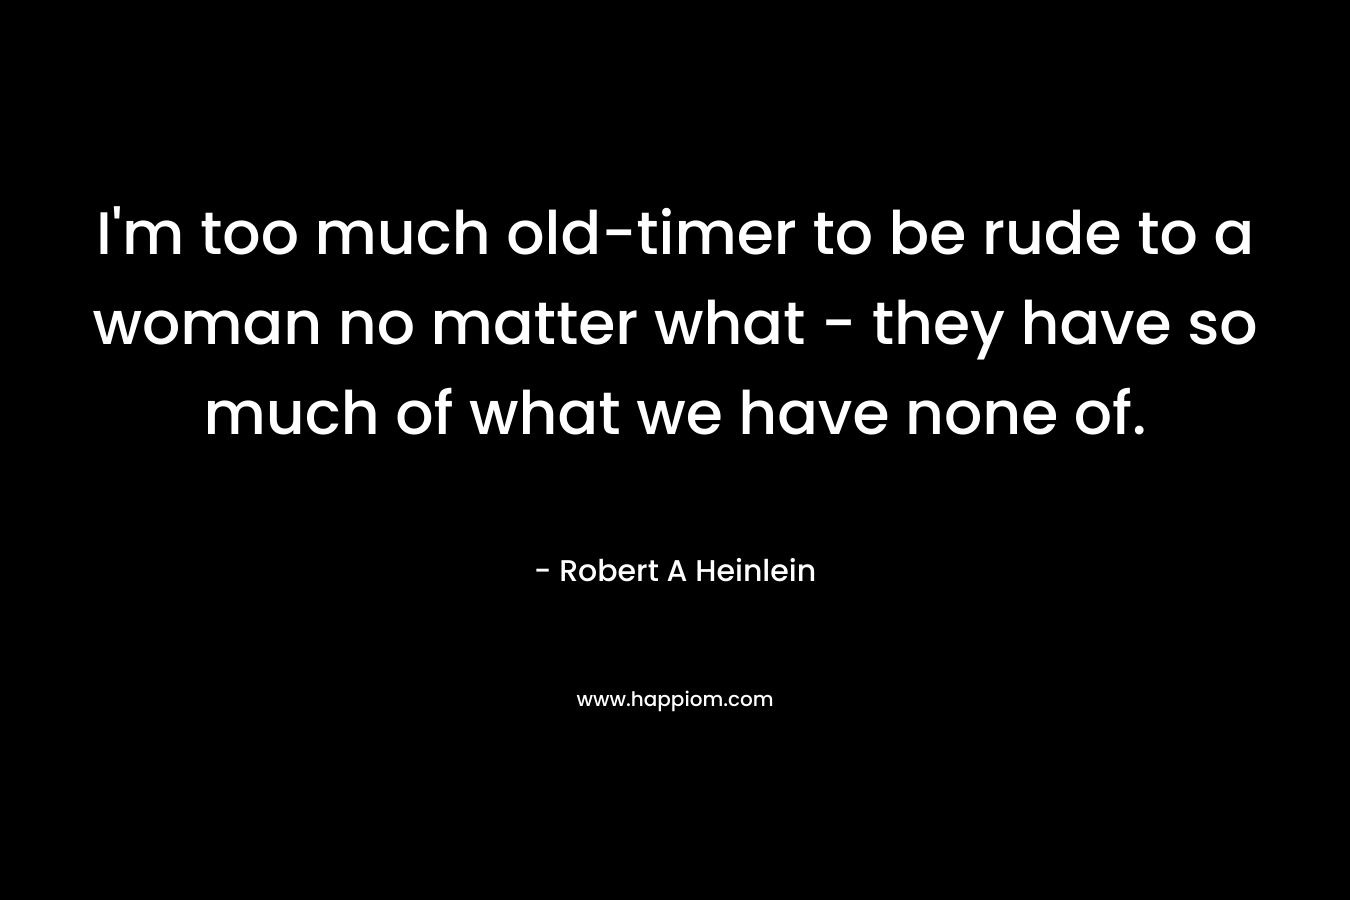 I’m too much old-timer to be rude to a woman no matter what – they have so much of what we have none of. – Robert A Heinlein